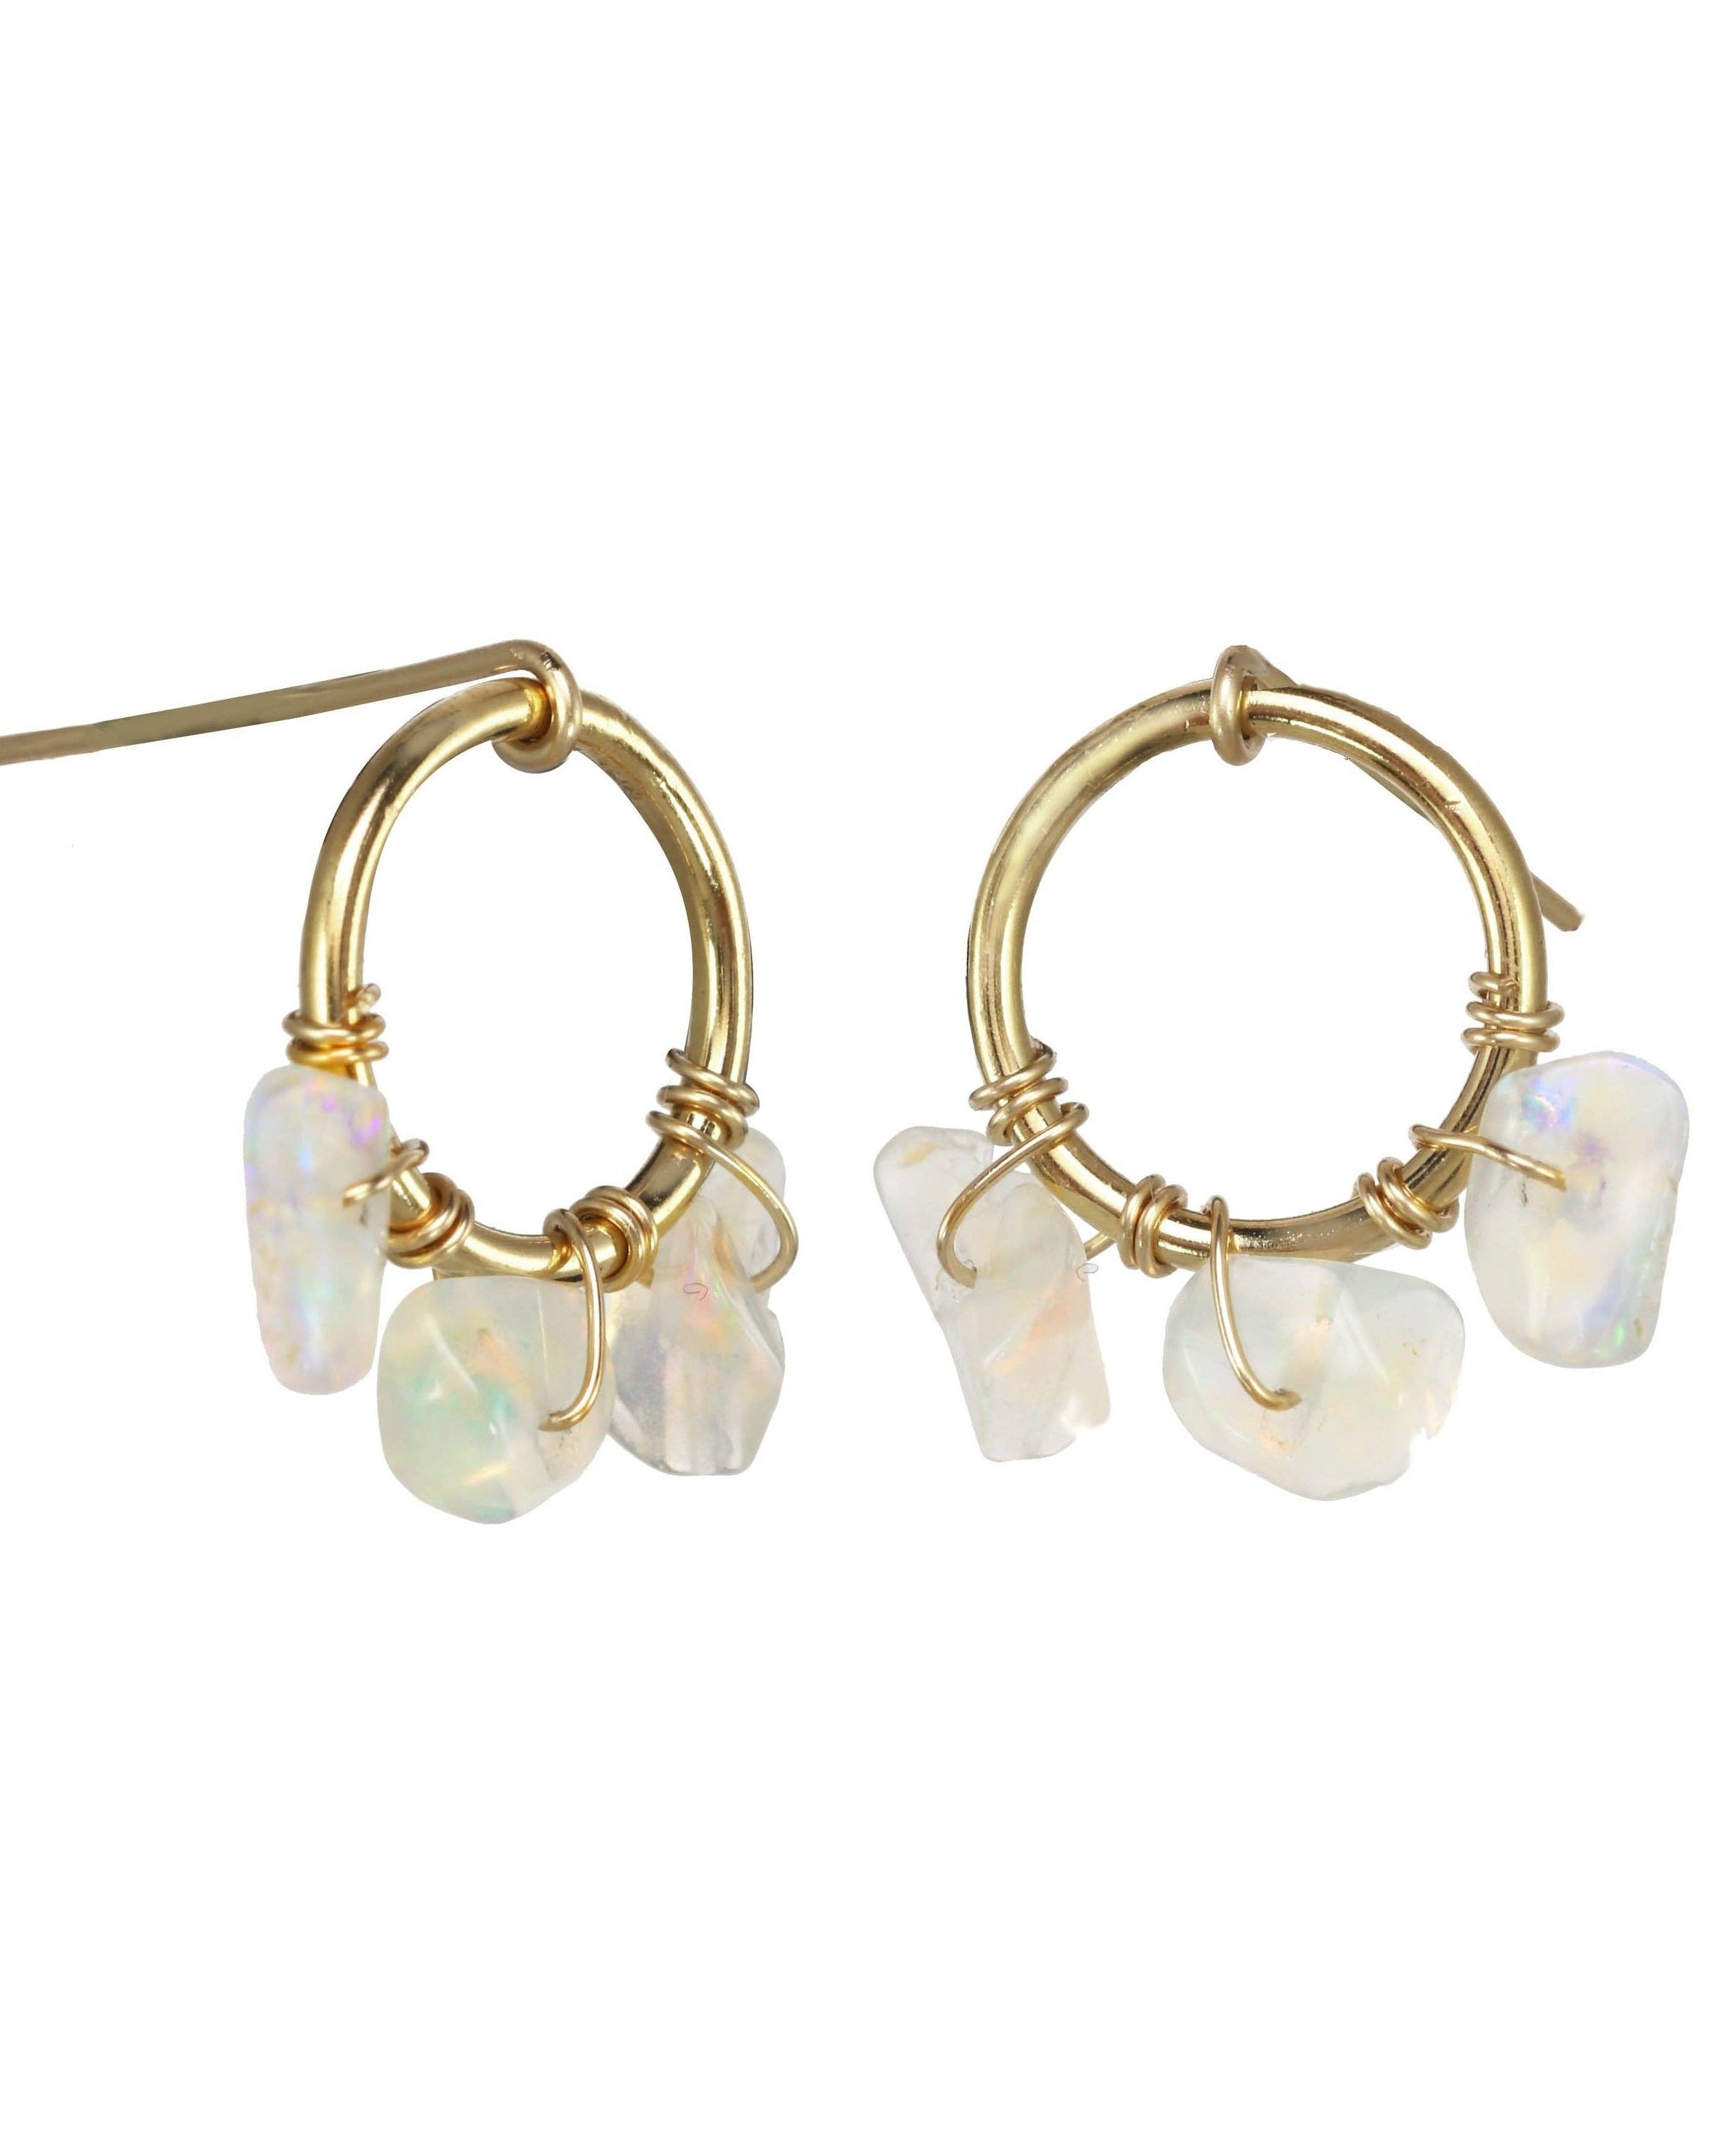 Brillante Earrings by KOZAKH. Short dangling earrings, crafted in 14K Gold Filled, embellished with Opal chips.